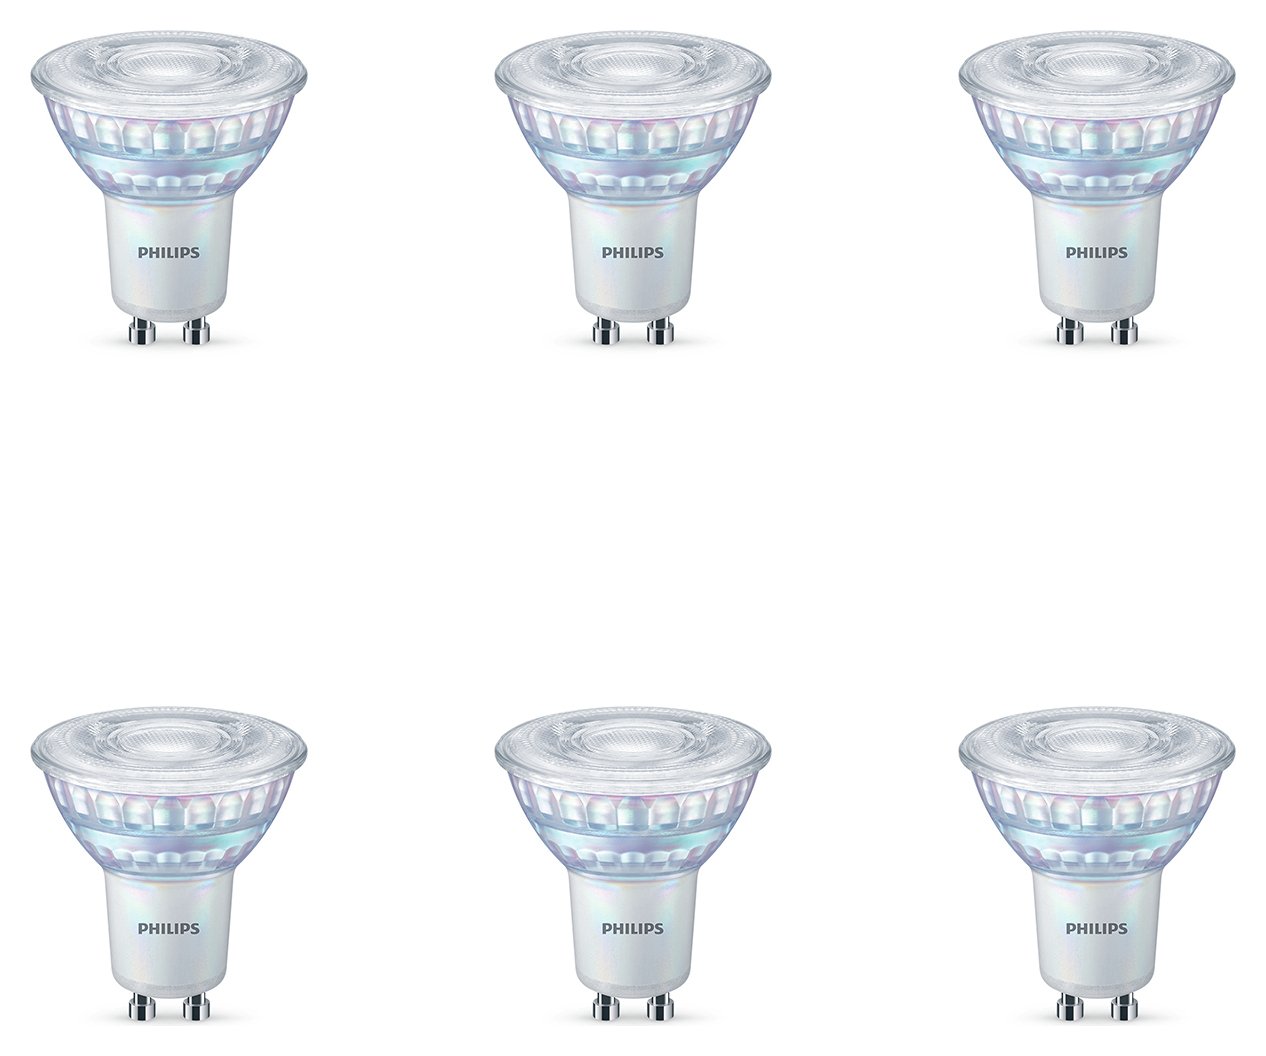 Philips 3.8W LED GU10 Dimmable Light Bulb - 6 Pack